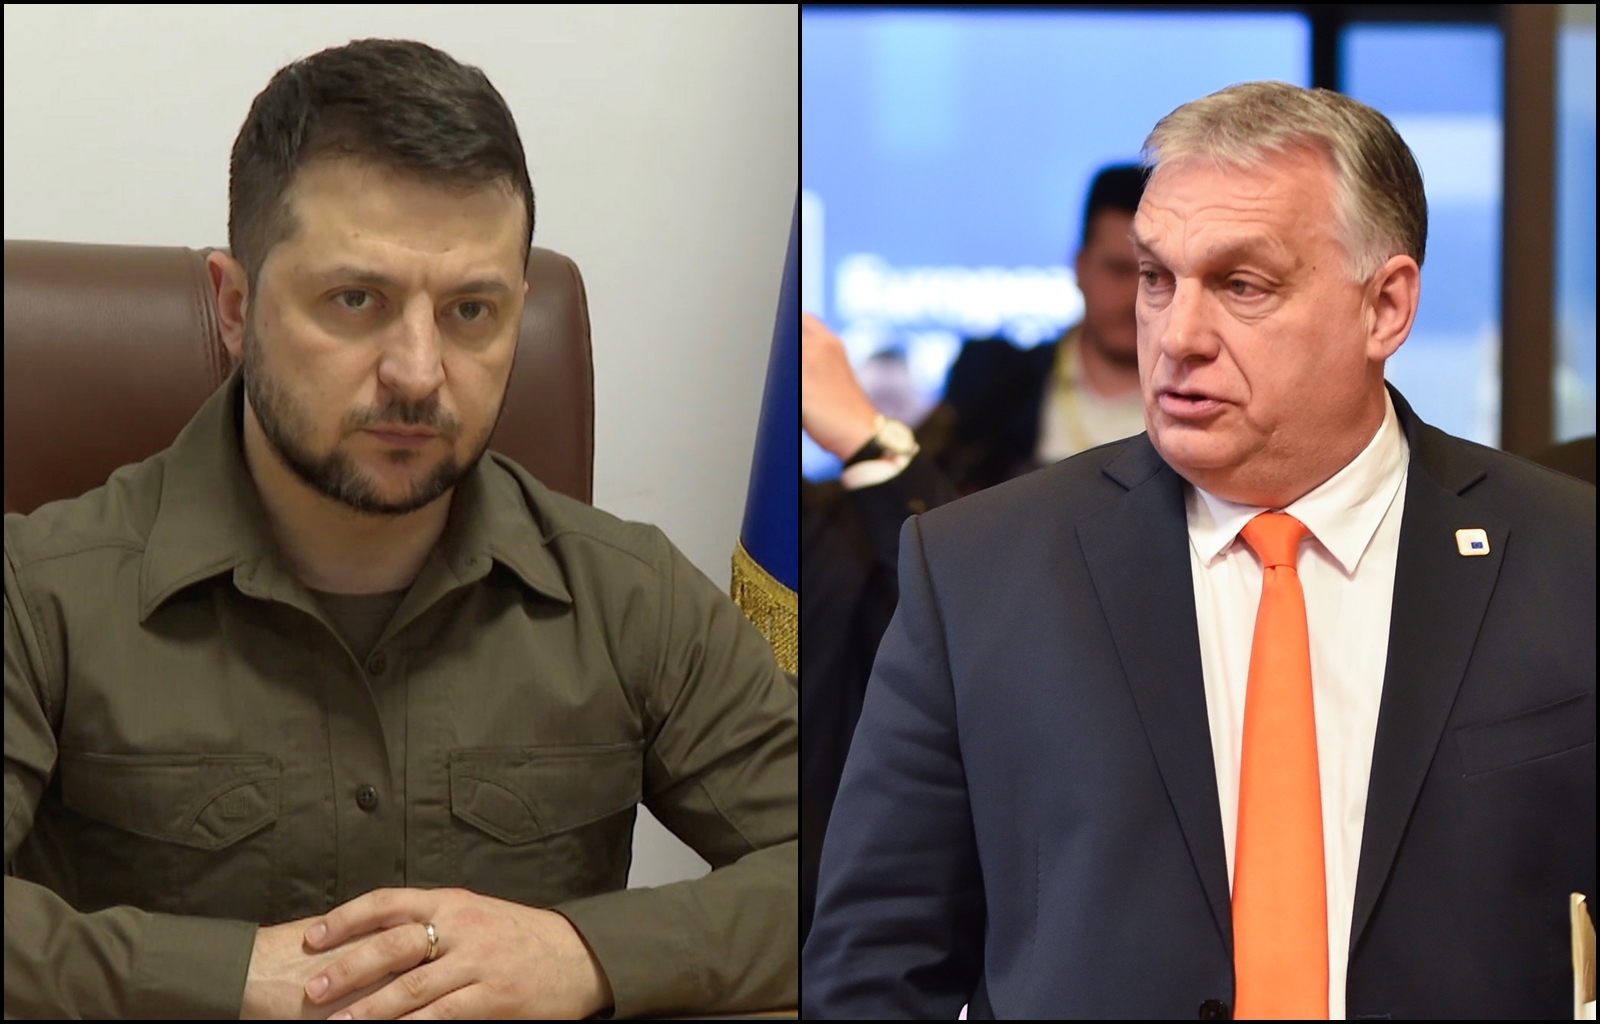 Zelensky demands clarity on Hungary's position - Orban continues to oppose energy sanctions and arms deliveries